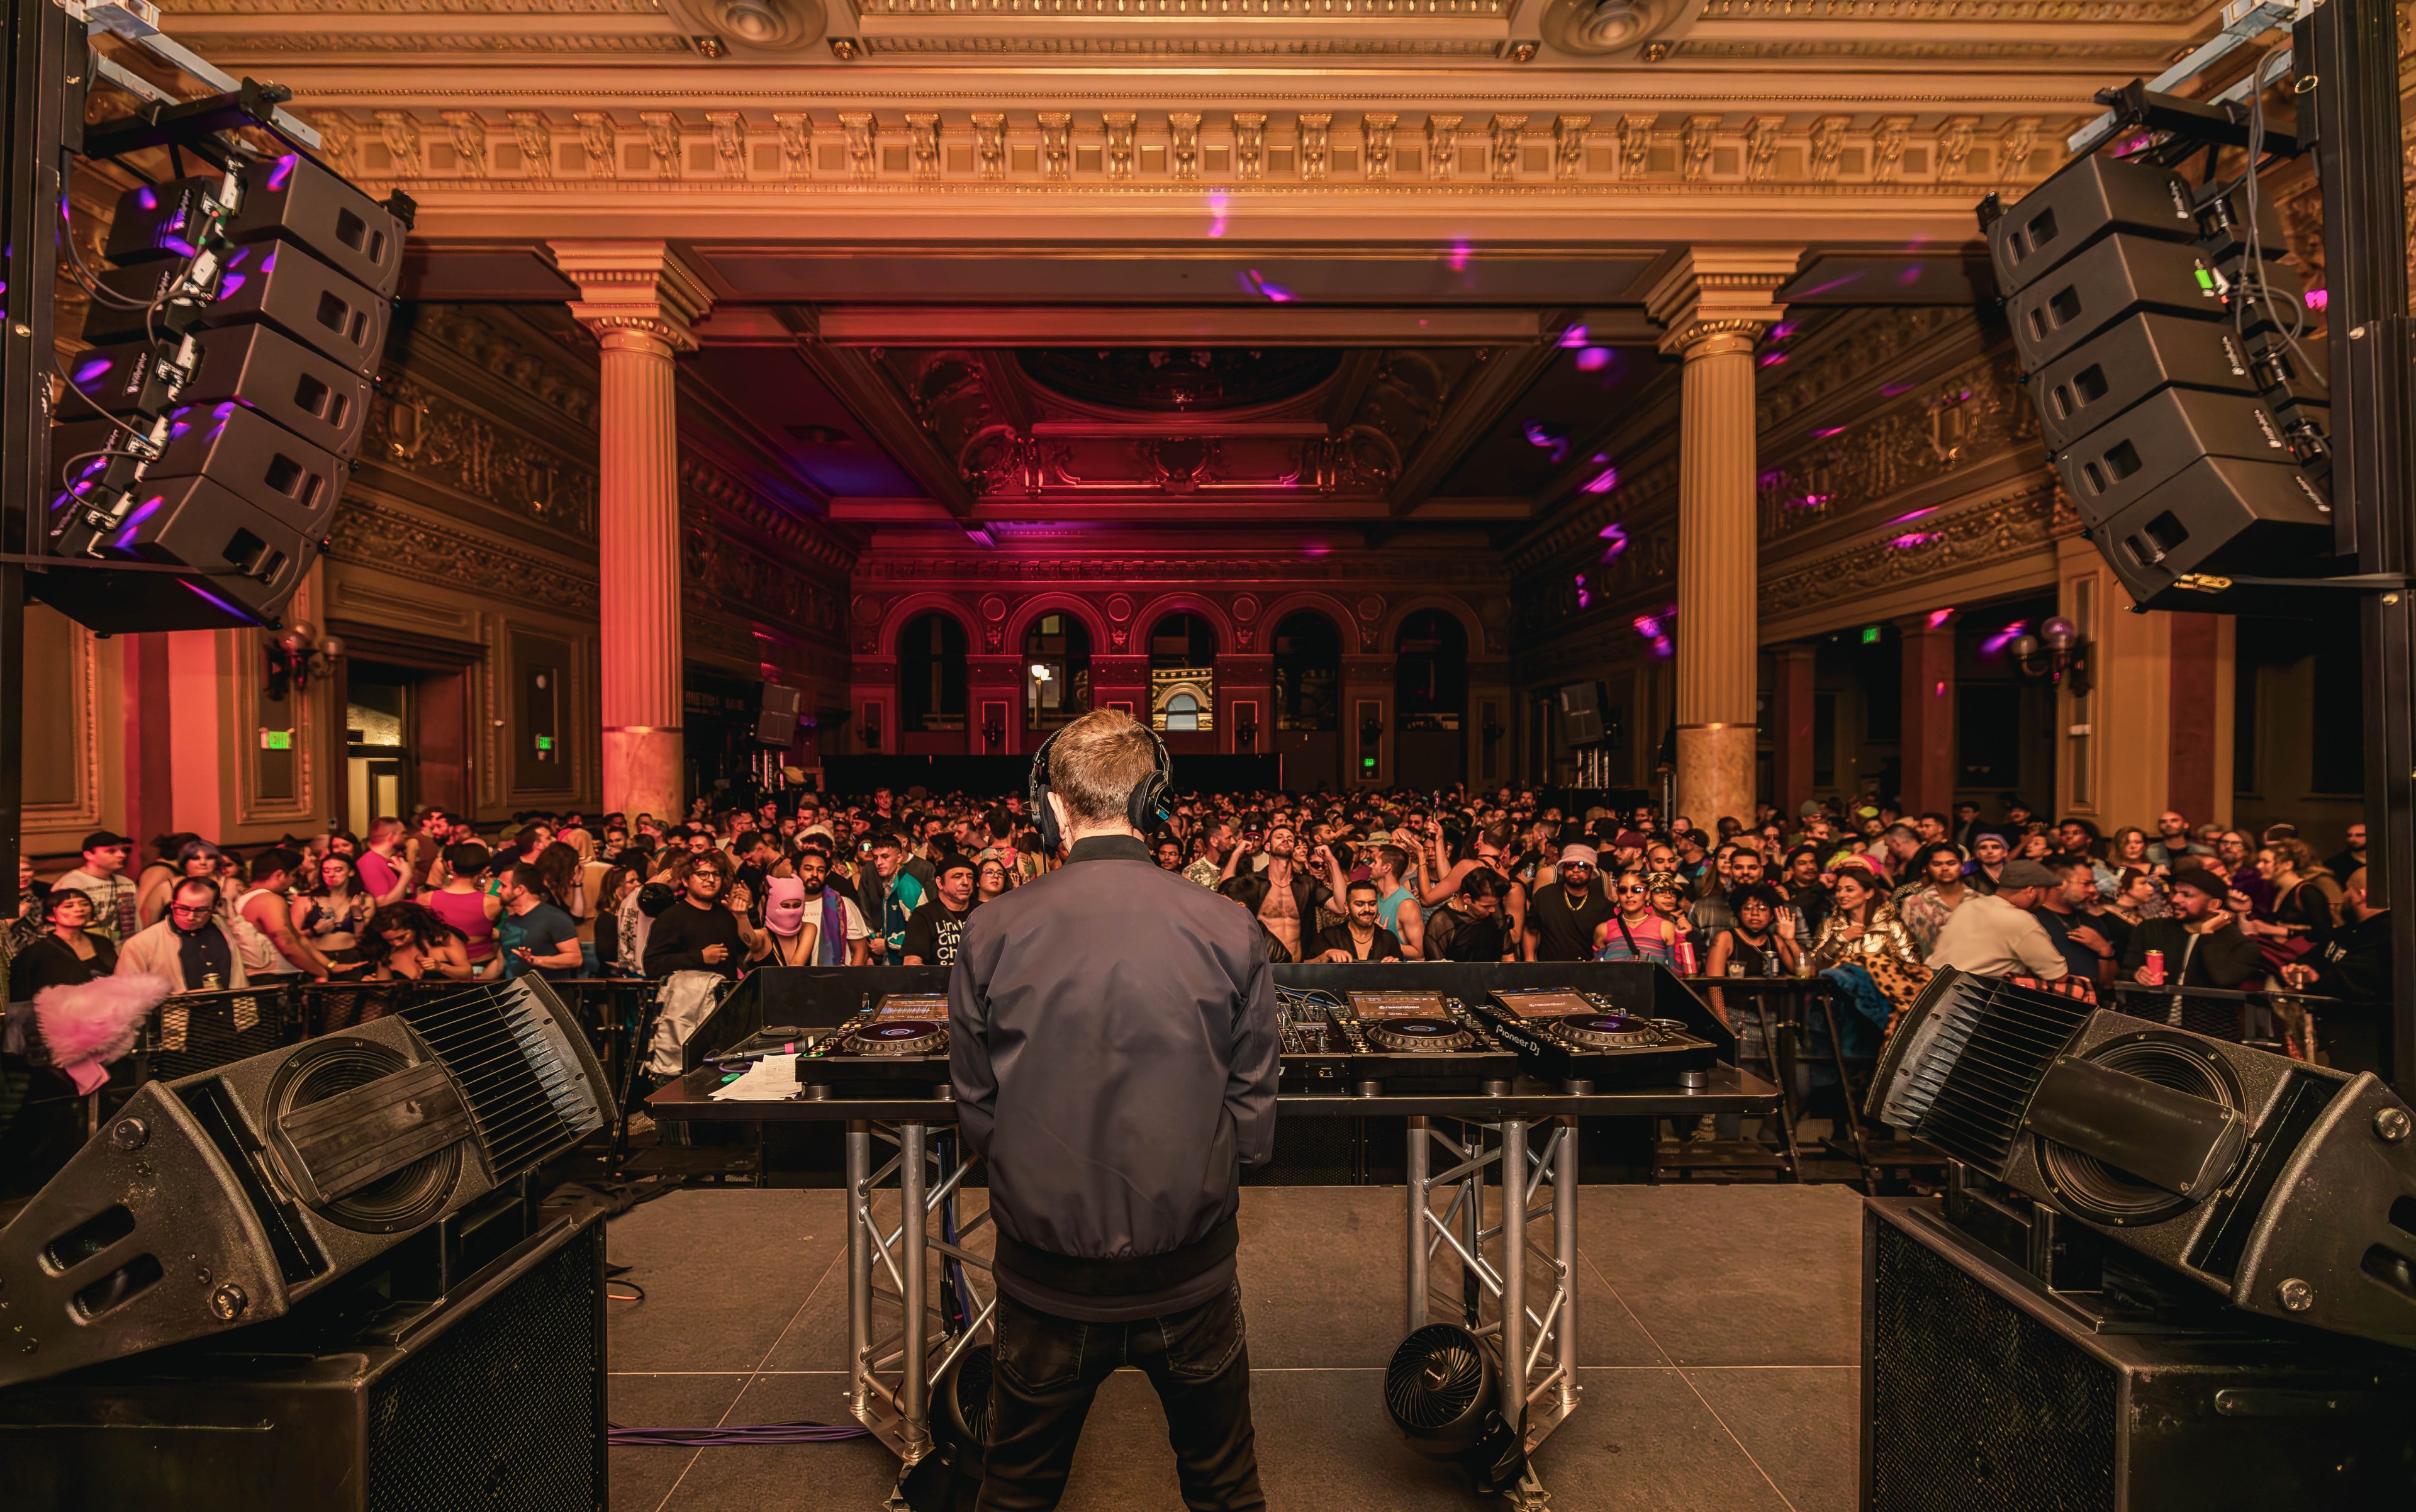 A DJ, seen from behind, performs on stage with large speakers in an opulent hall filled with a vibrant crowd, under colorful lighting, inside a grand, ornate building.